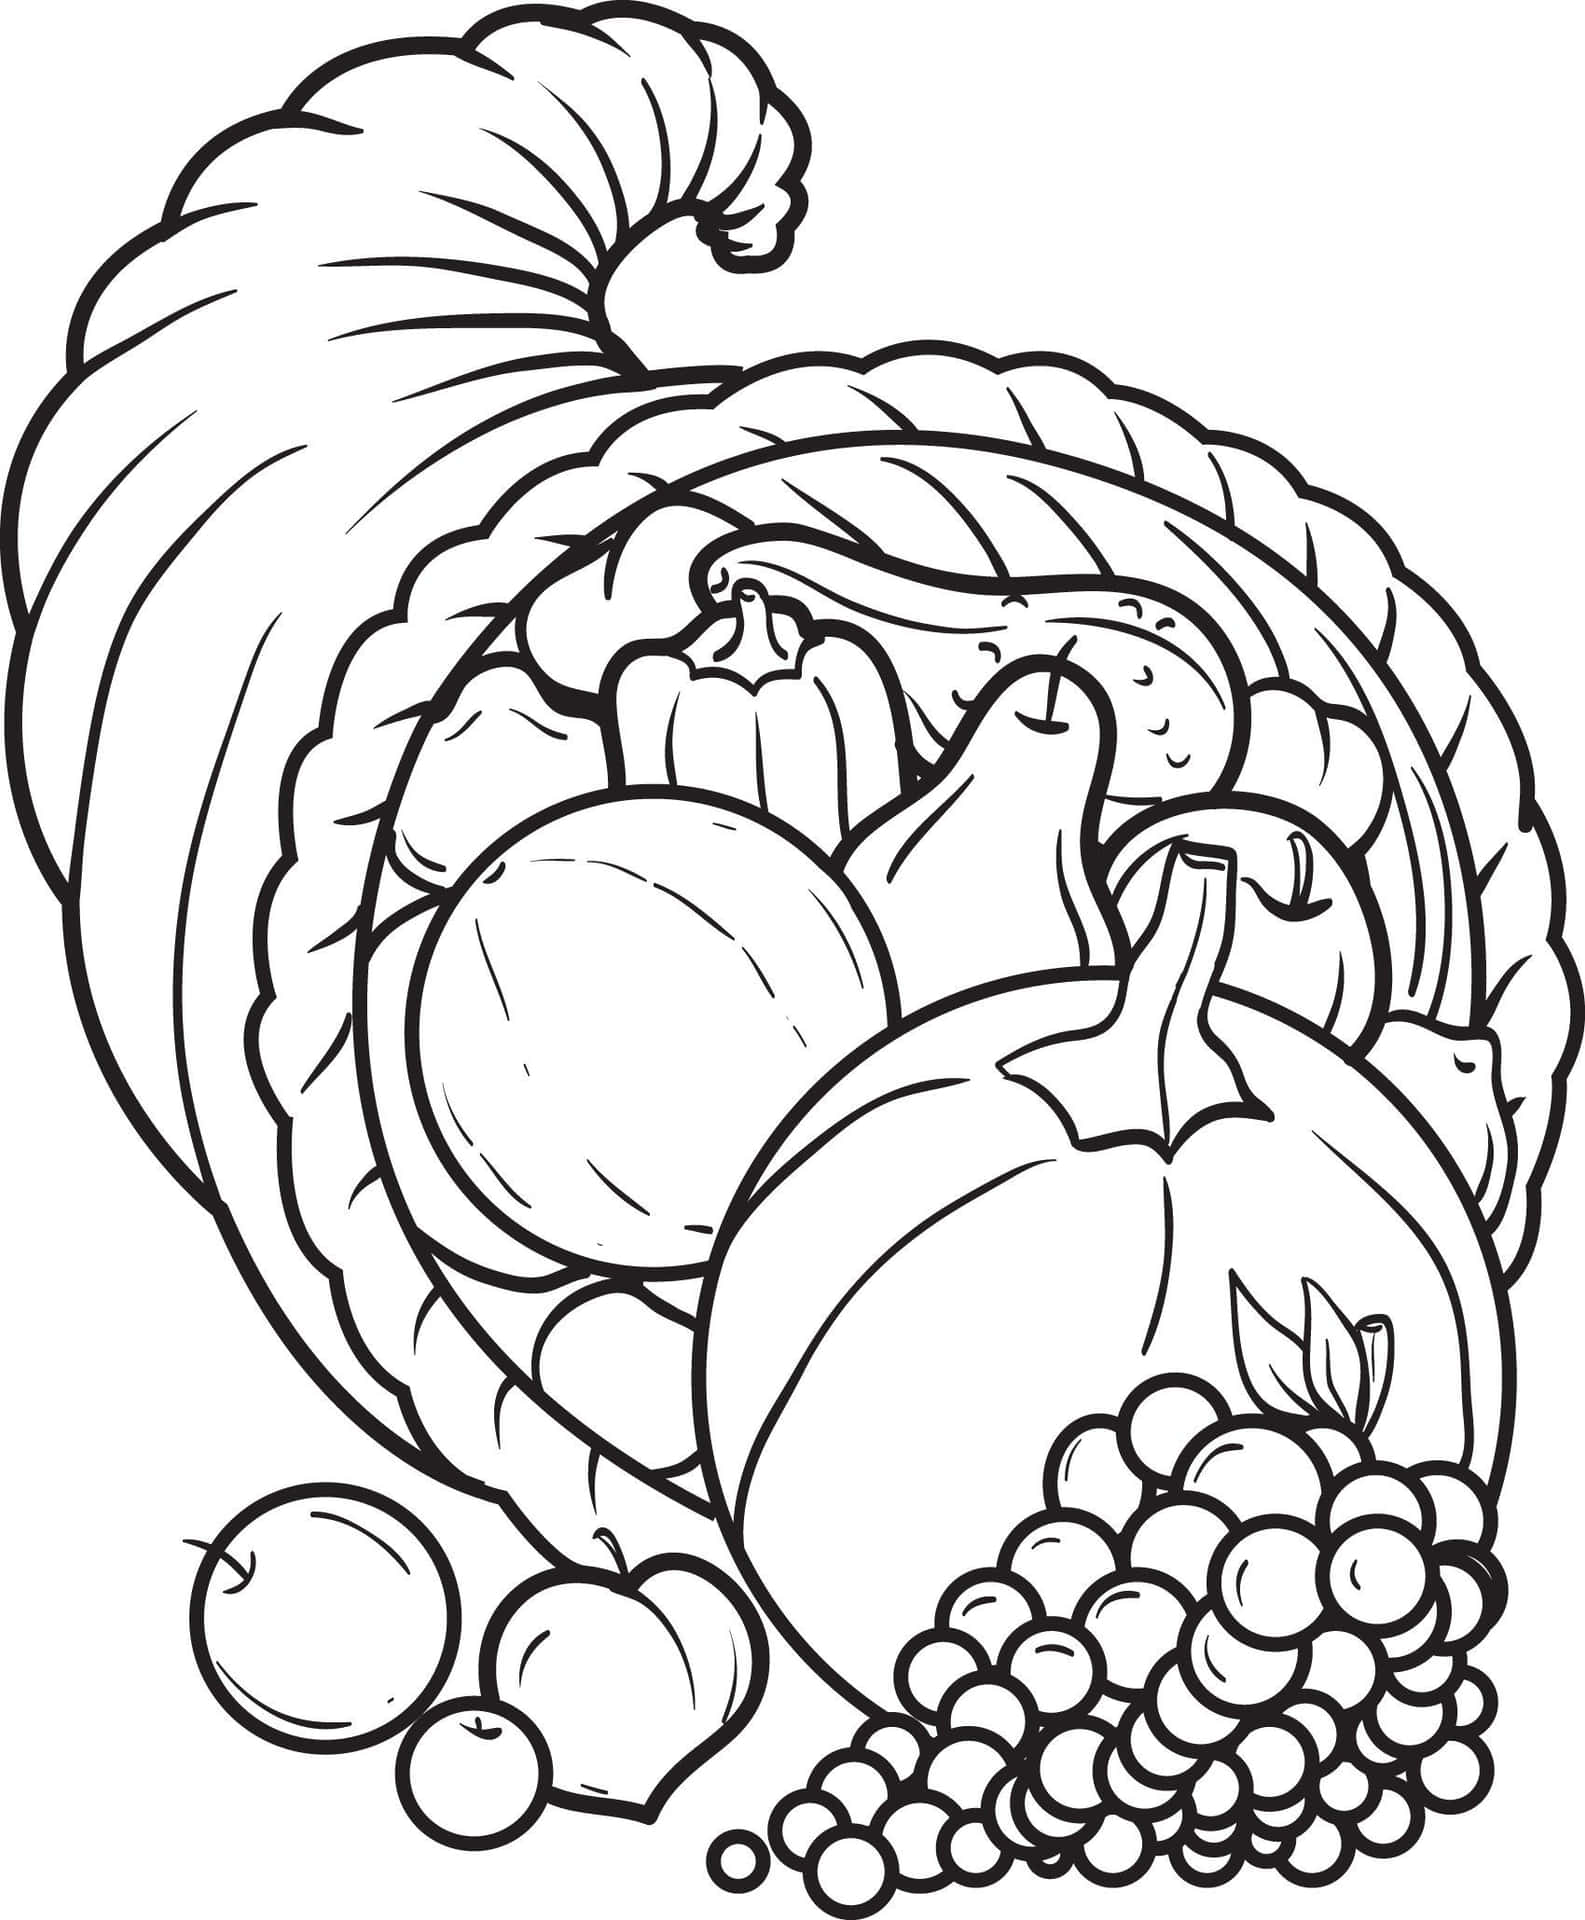 Enjoy The Beauty of Autumn and Make Beautiful Fall Coloring Pictures.